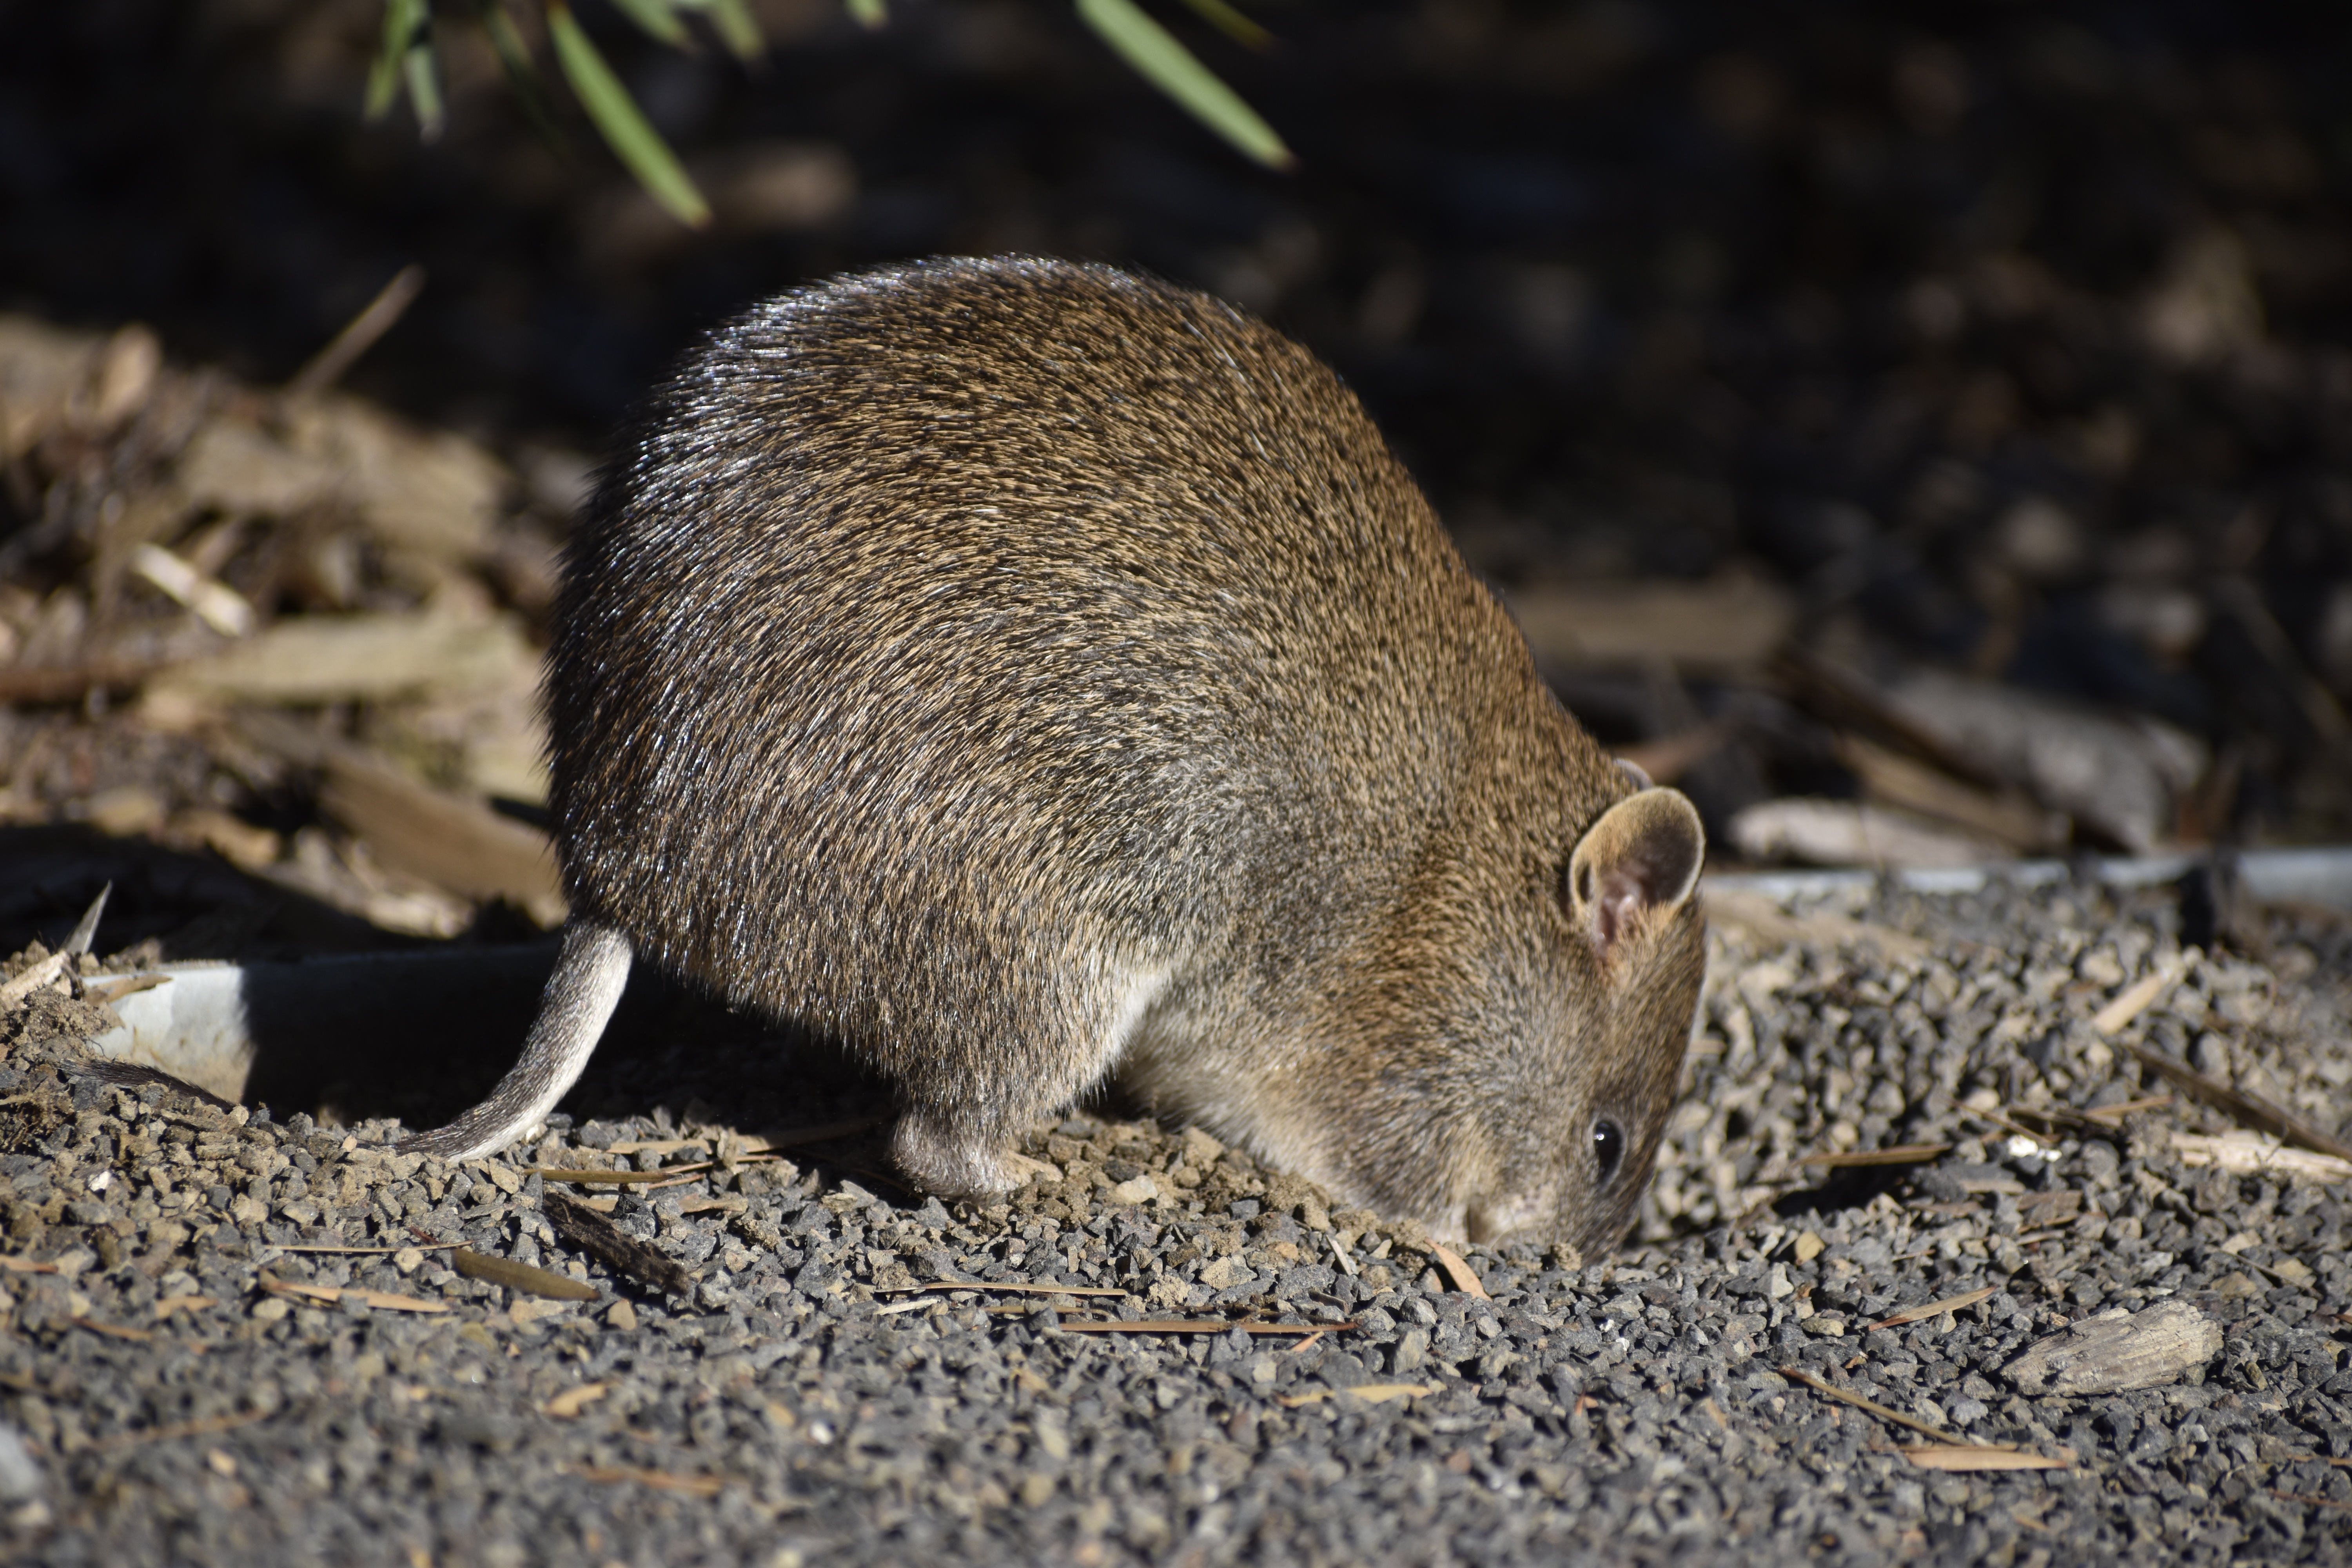 A photo showing a Southern Brown Bandicoot digging, with its distinctive round bottom and stumpy tail.